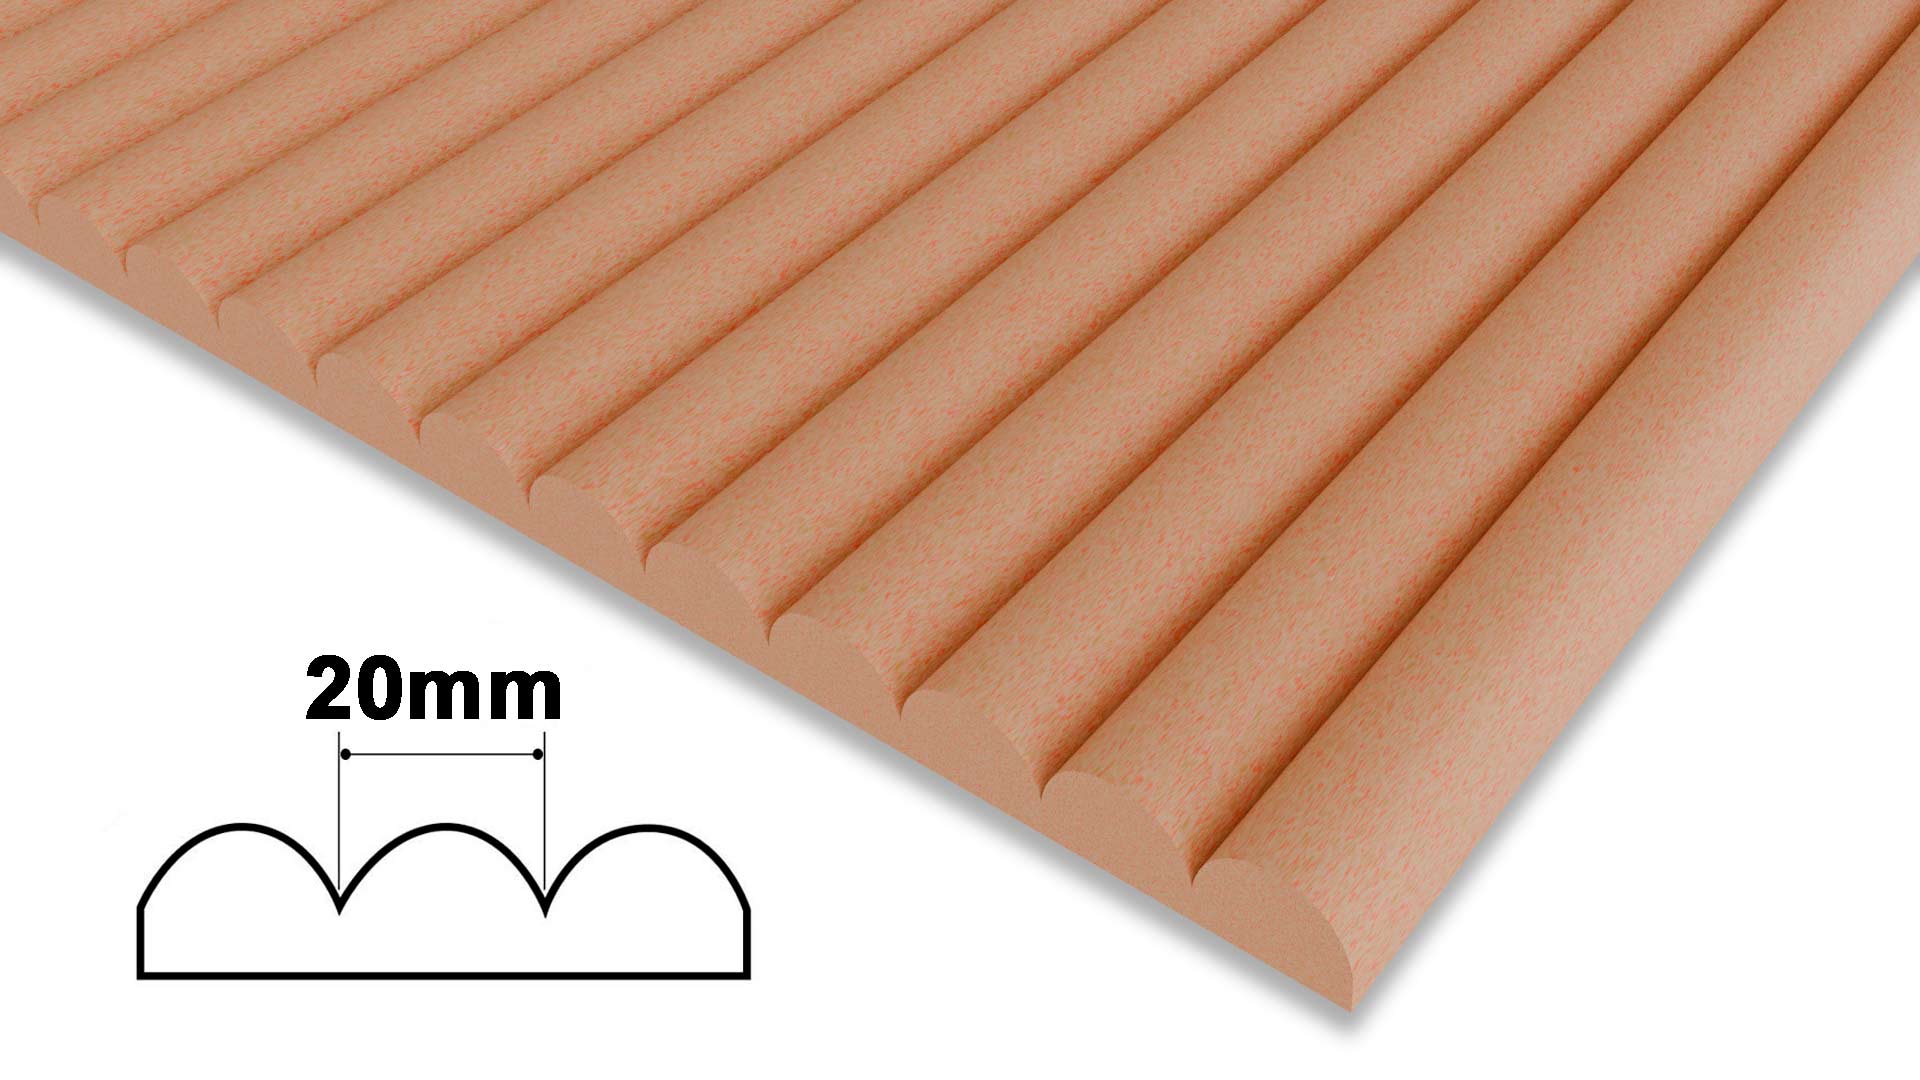 Ribbed Fire Rated MDF Panels - Ribs Width 20mm